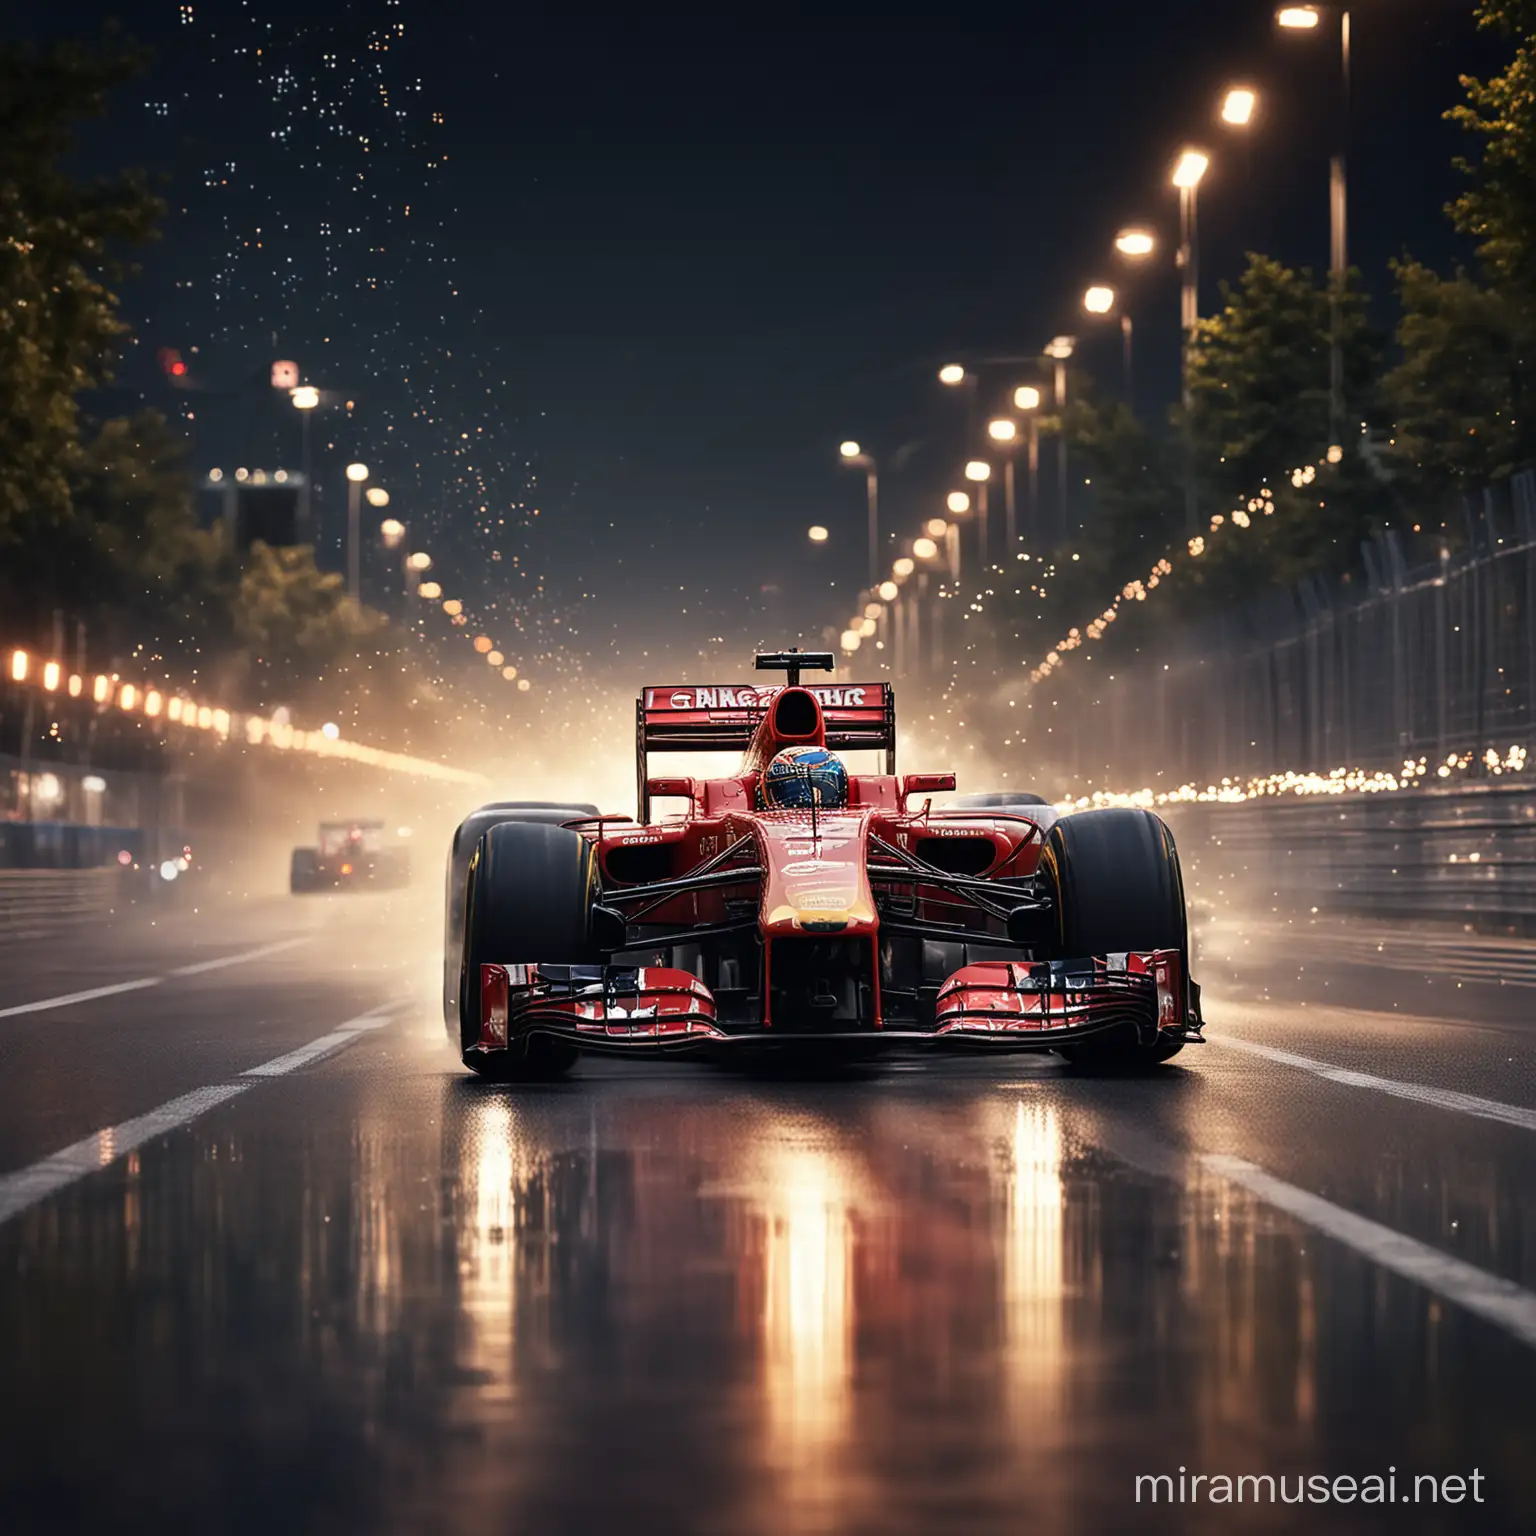 create an illuminating image of formula 1 cars speeding down a straight for the final stretch of the race to determine the champion. Make the image inspiring and awe-bringing. Make it cool looking to go on a t-shirt. Make people inspired through the bokeh acts of illumination in F1 cars